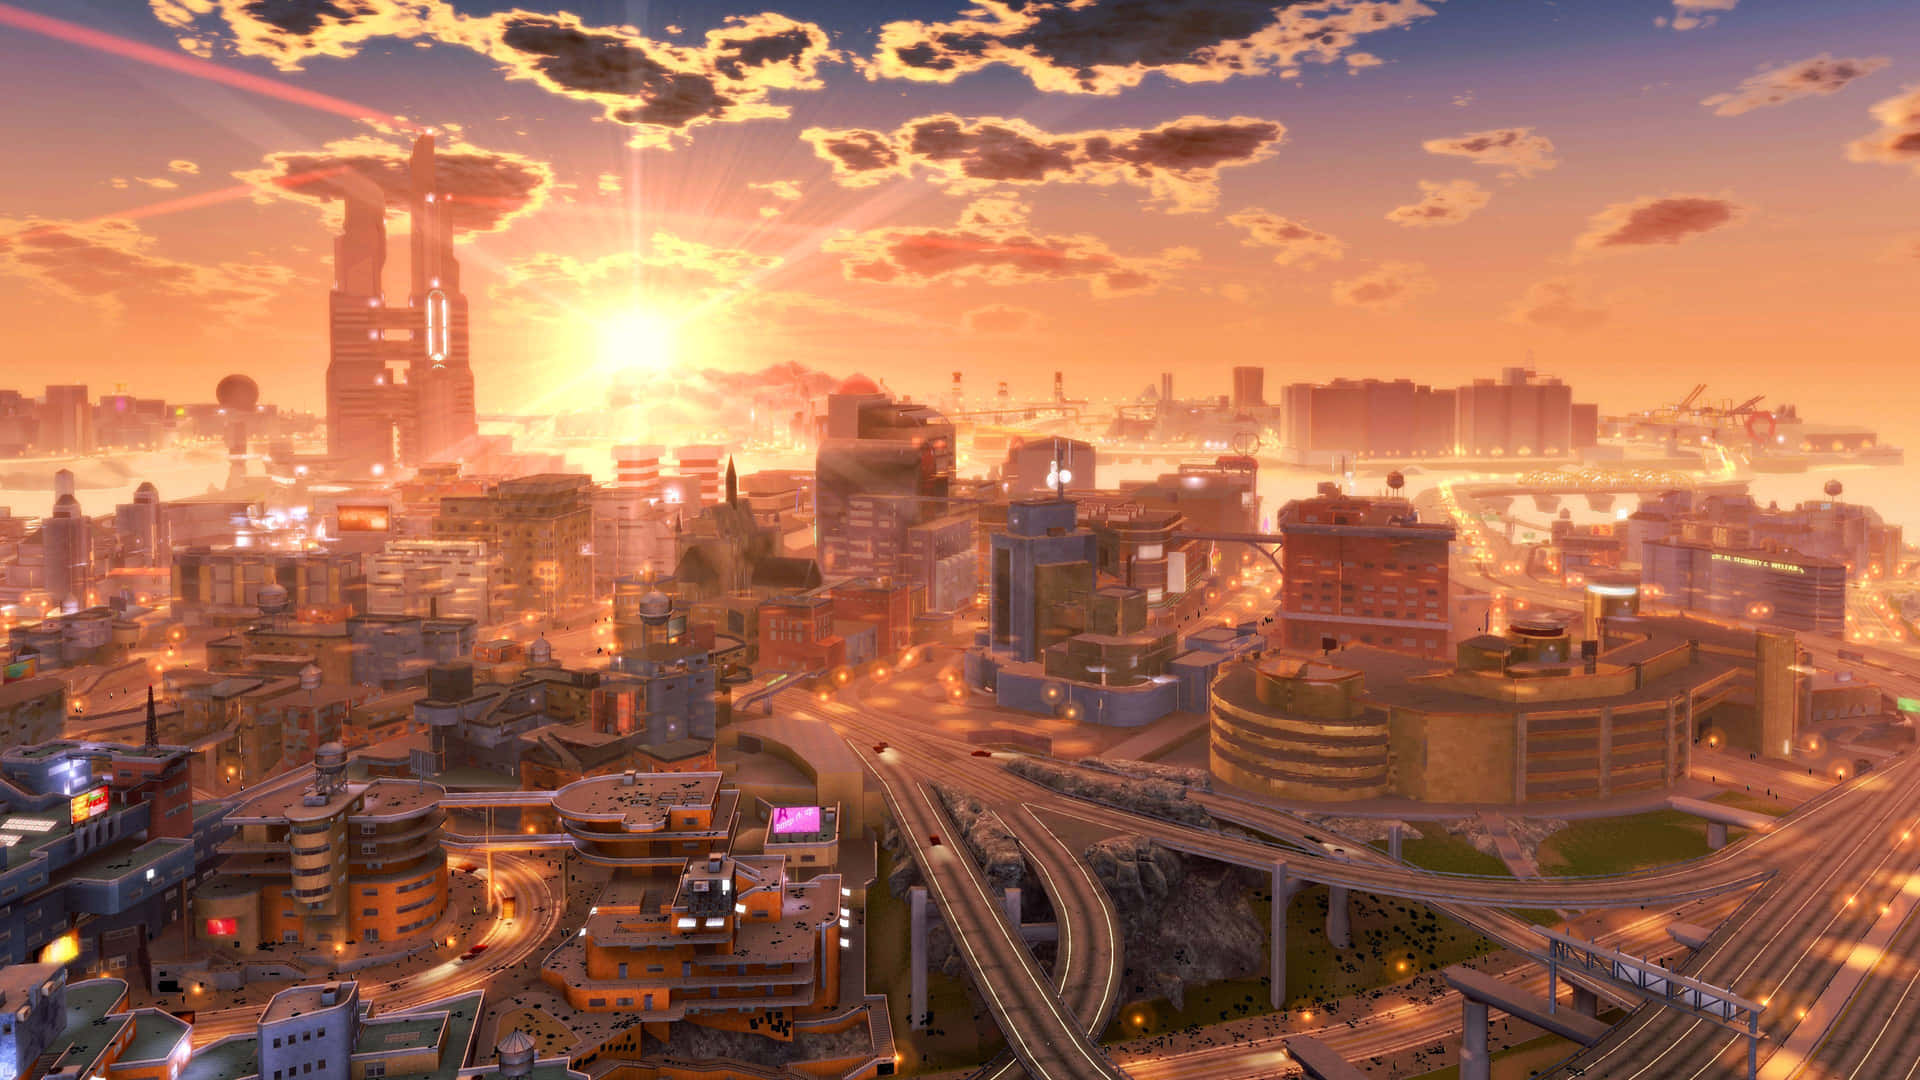 Future City With Bright Sunset View Picture